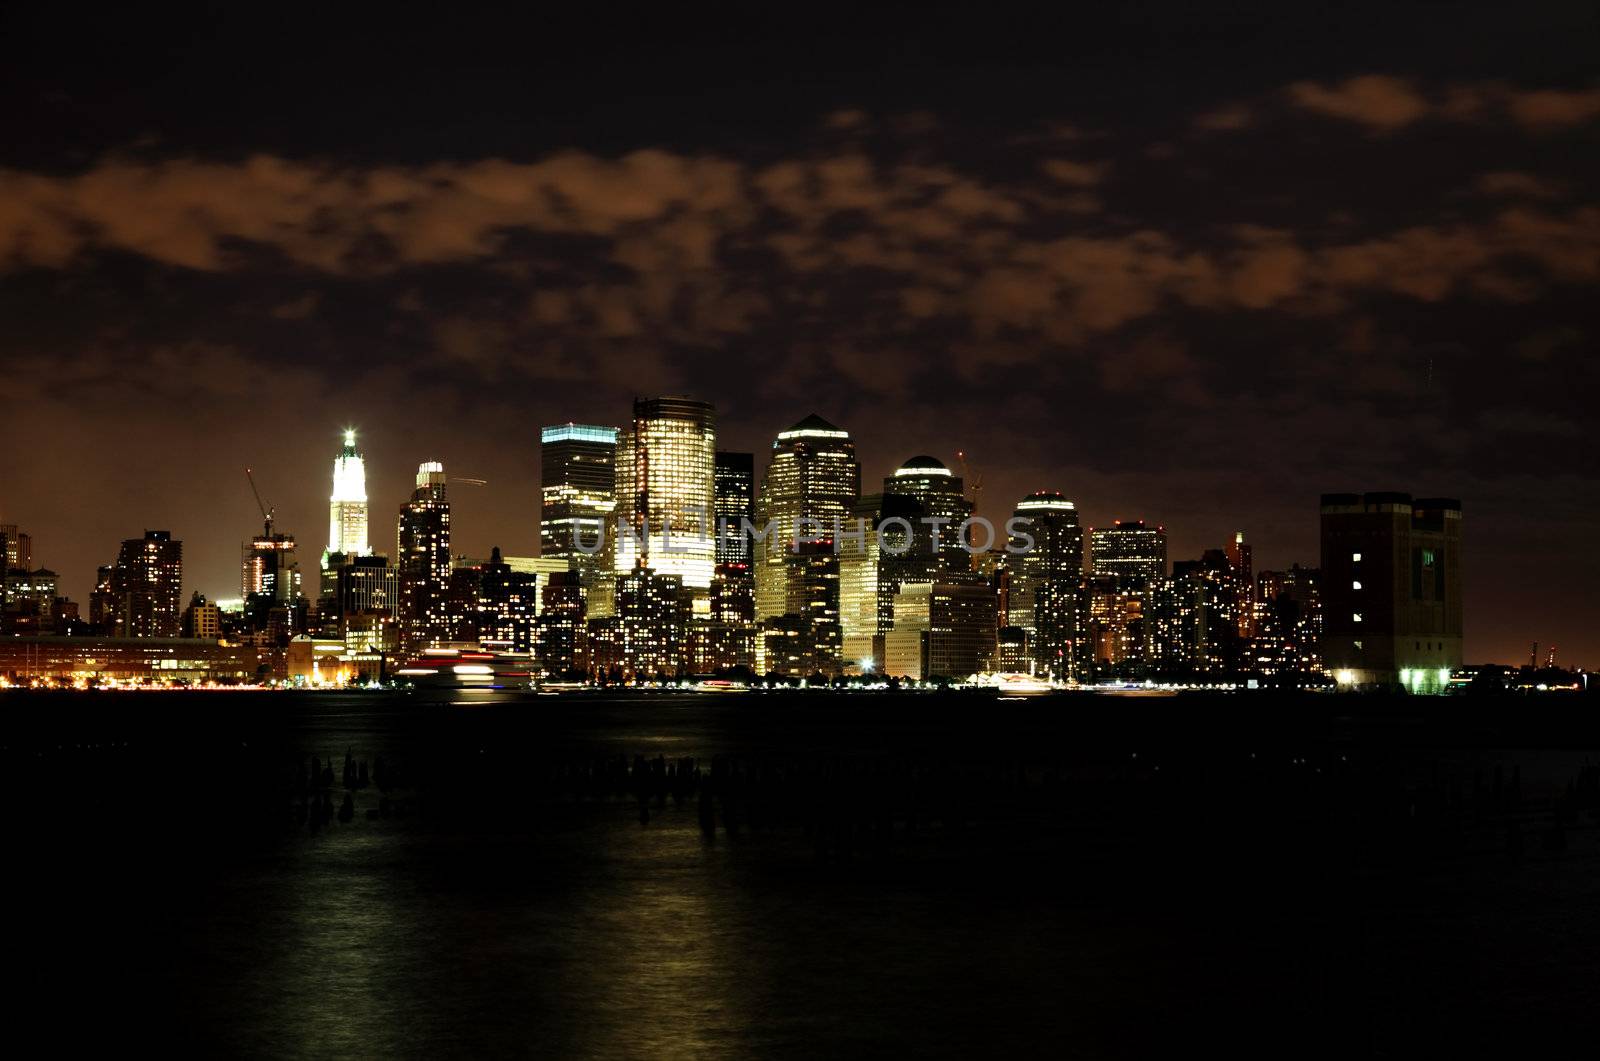 The Lower Manhattan Skyline viewed from New Jersey side